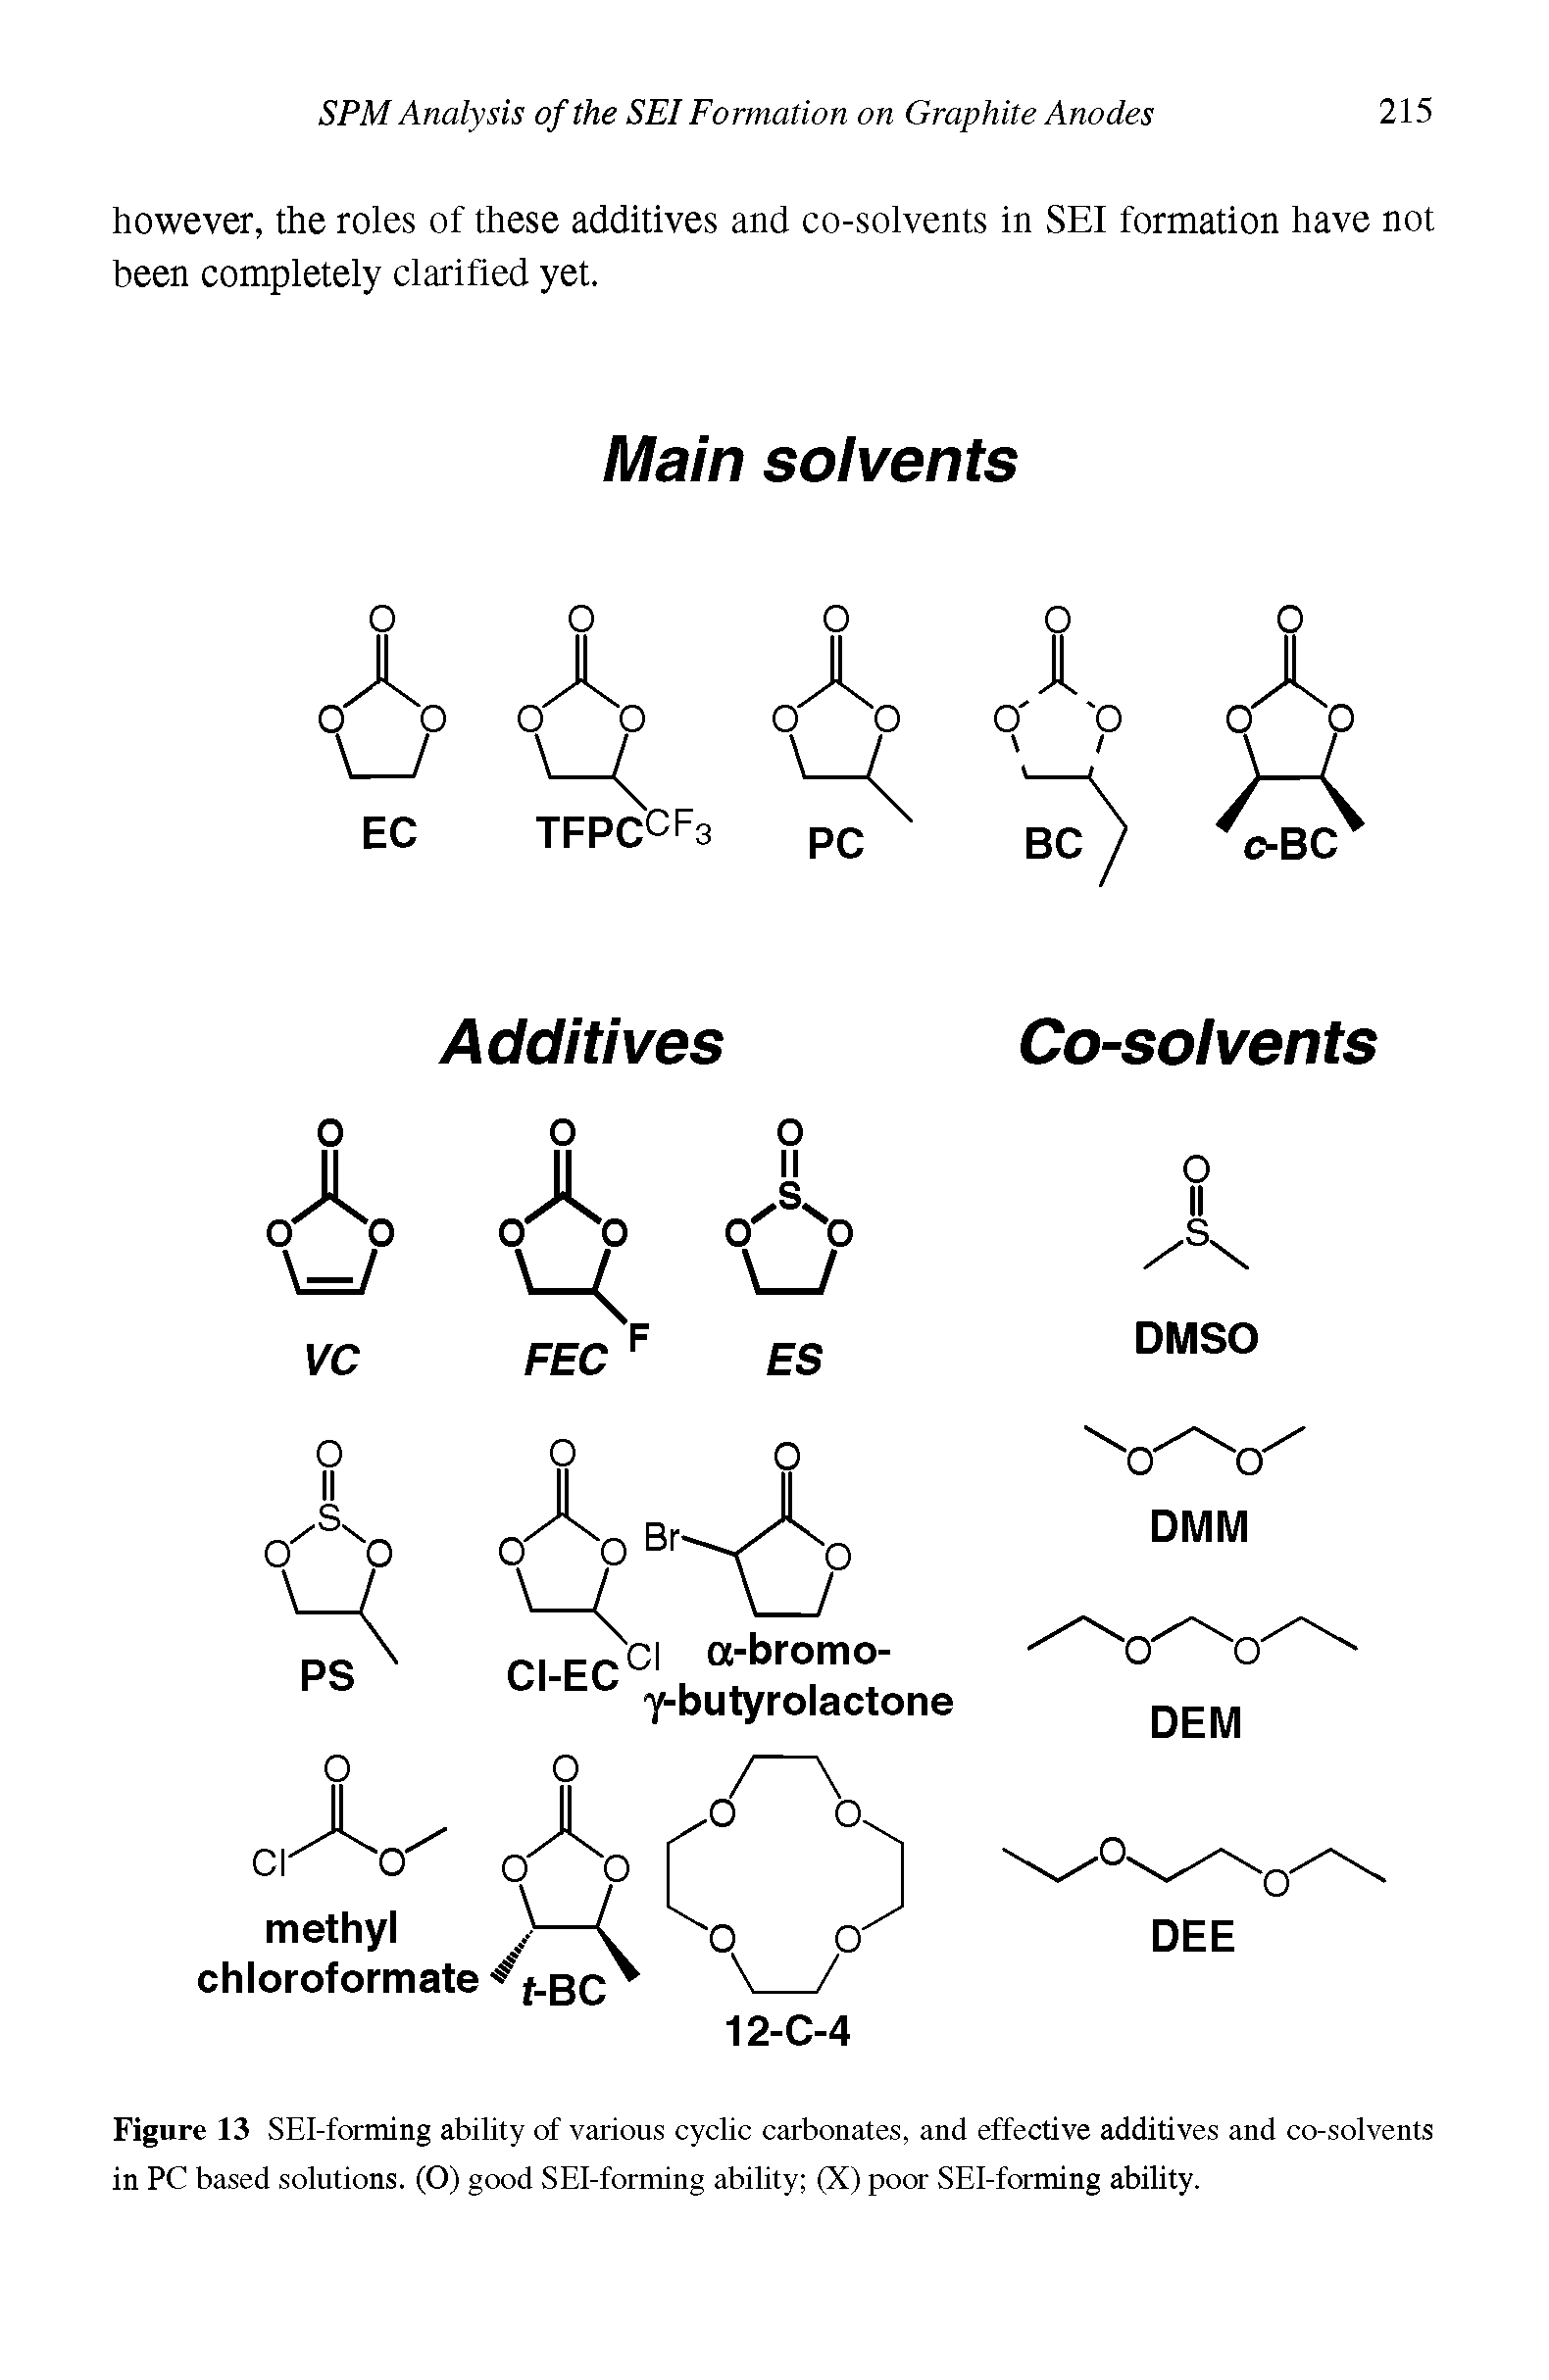 Figure 13 SEI-forming ability of various cyclic carbonates, and effective additives and co-solvents in PC based solutions. (O) good SEI-forming ability (X) poor SEI-forming ability.